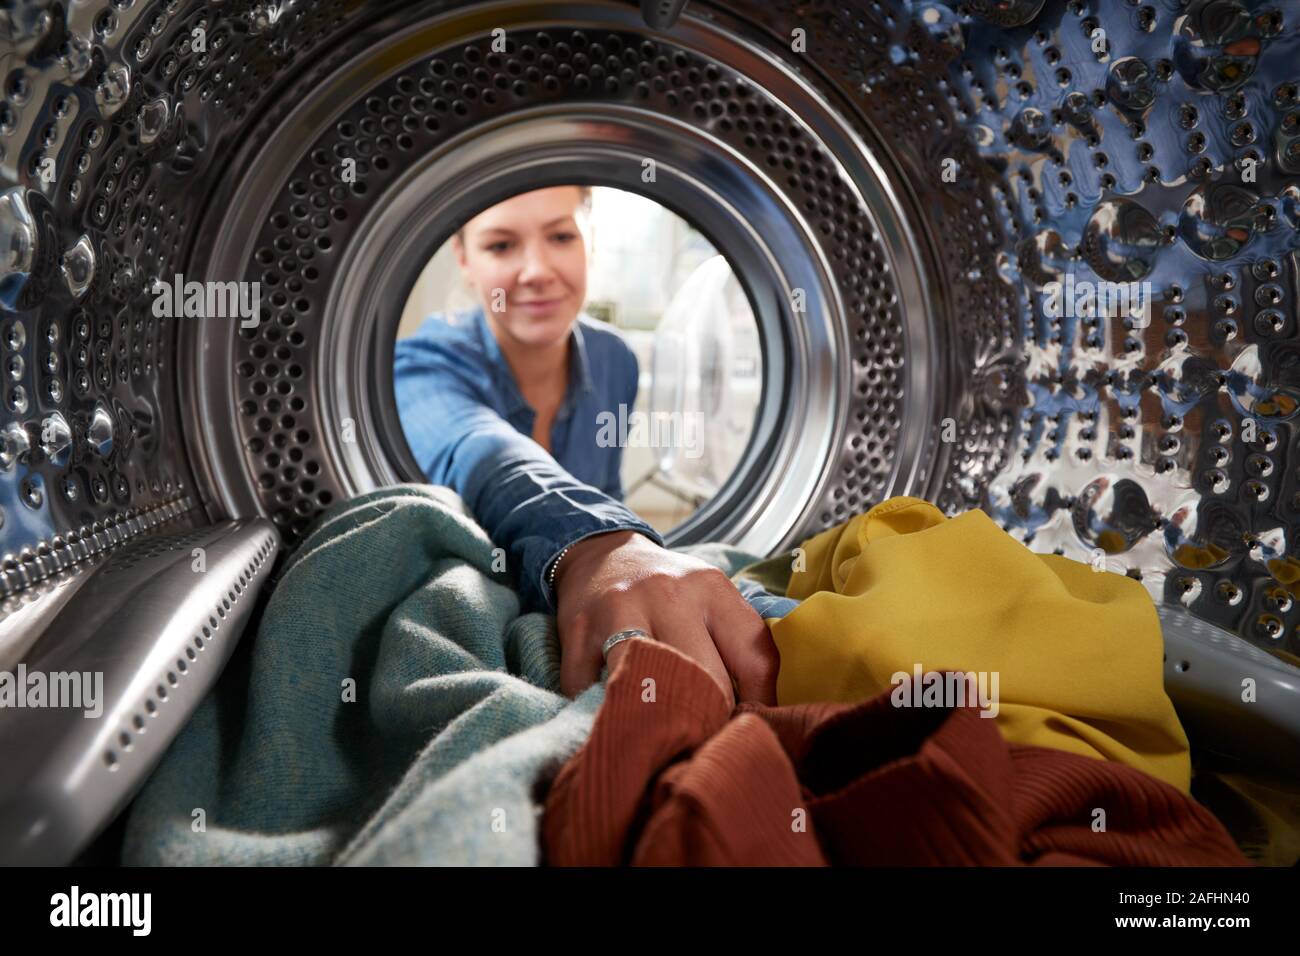 View Looking Out From Inside Washing Machine As Young Woman Does Laundry Stock Photo